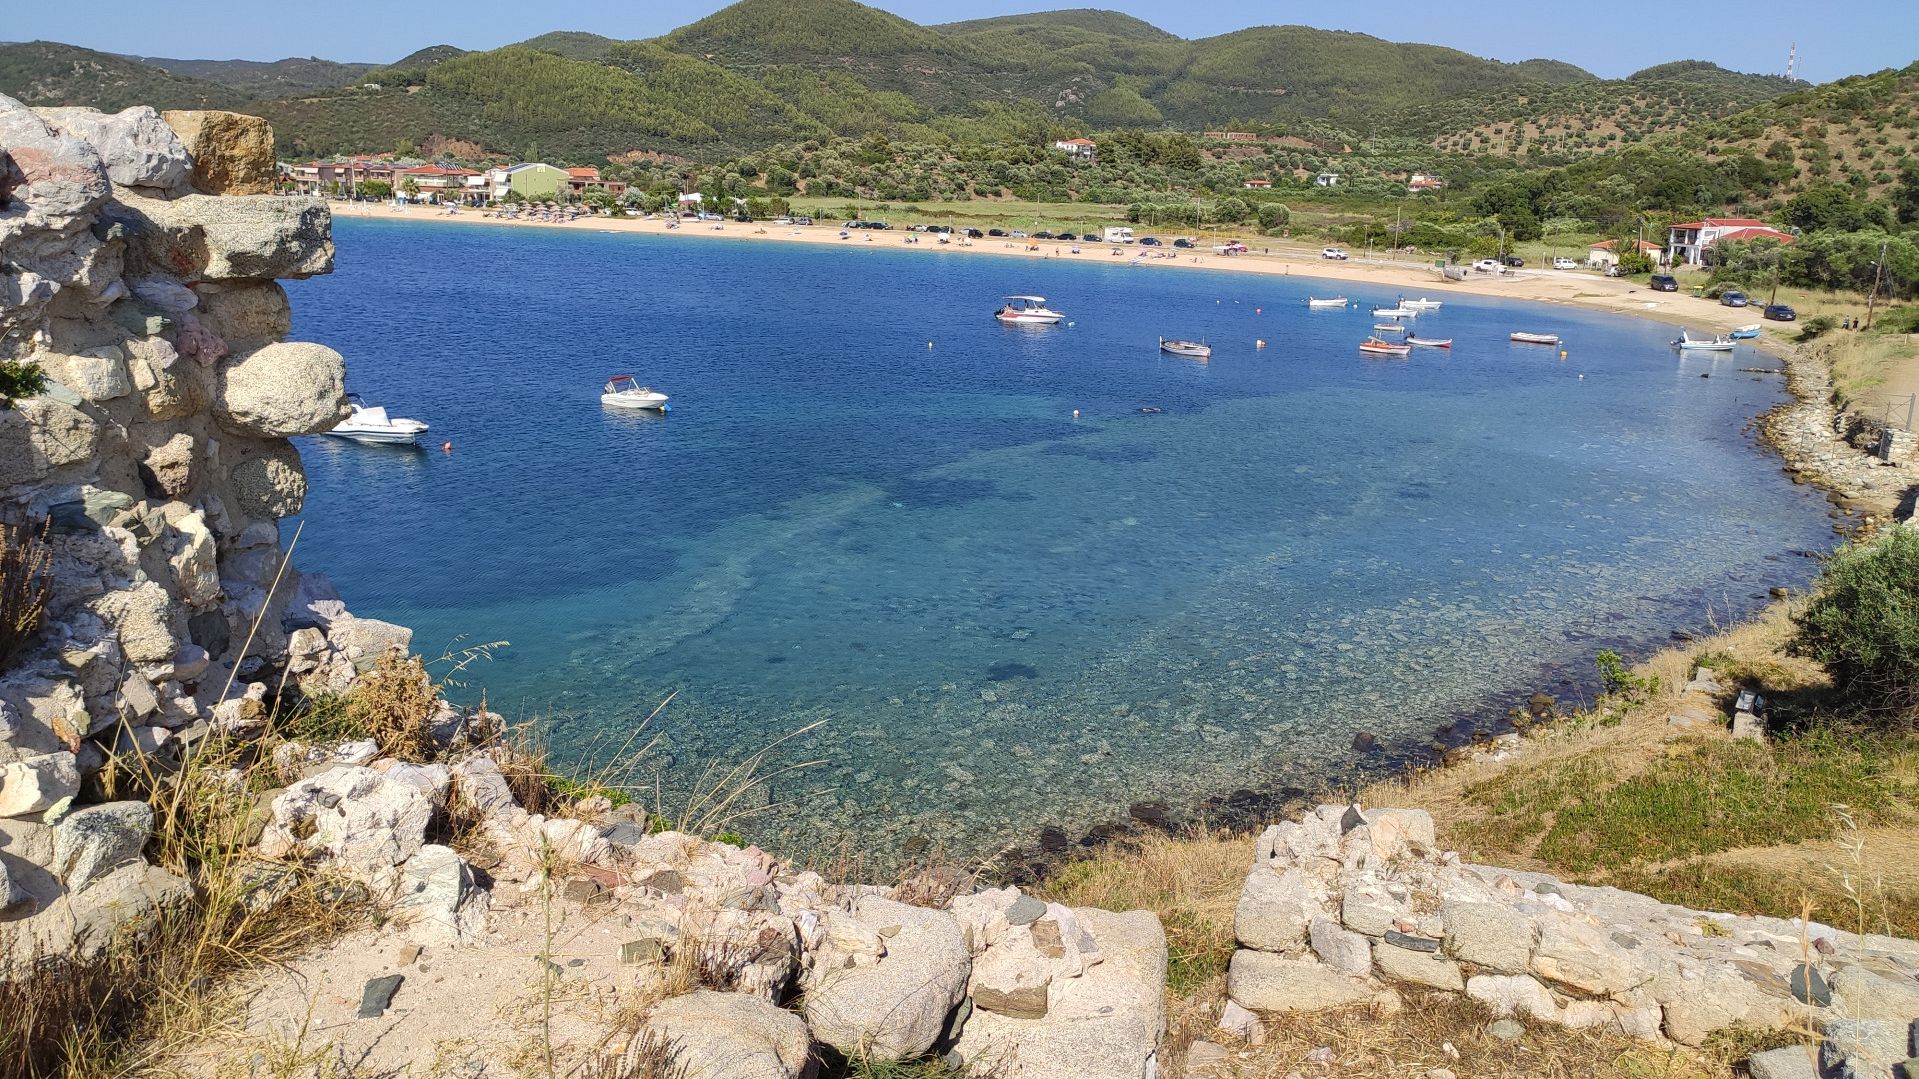 What to see in Sithonia during 1 day